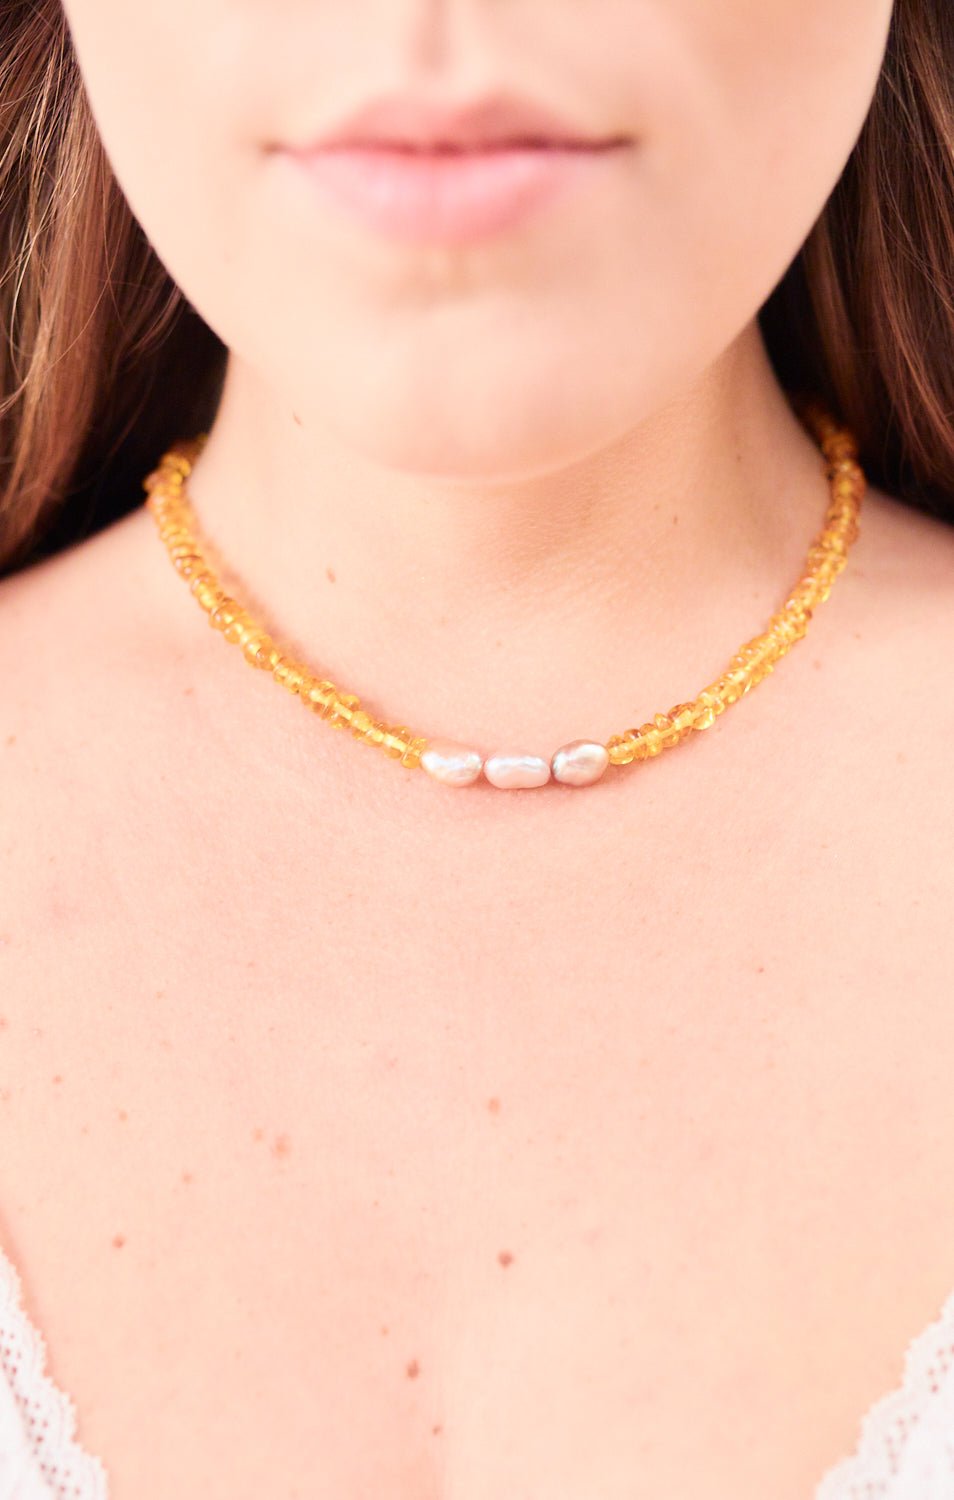 Adult Amber Necklace - Driftwood Maui & Home By Driftwood